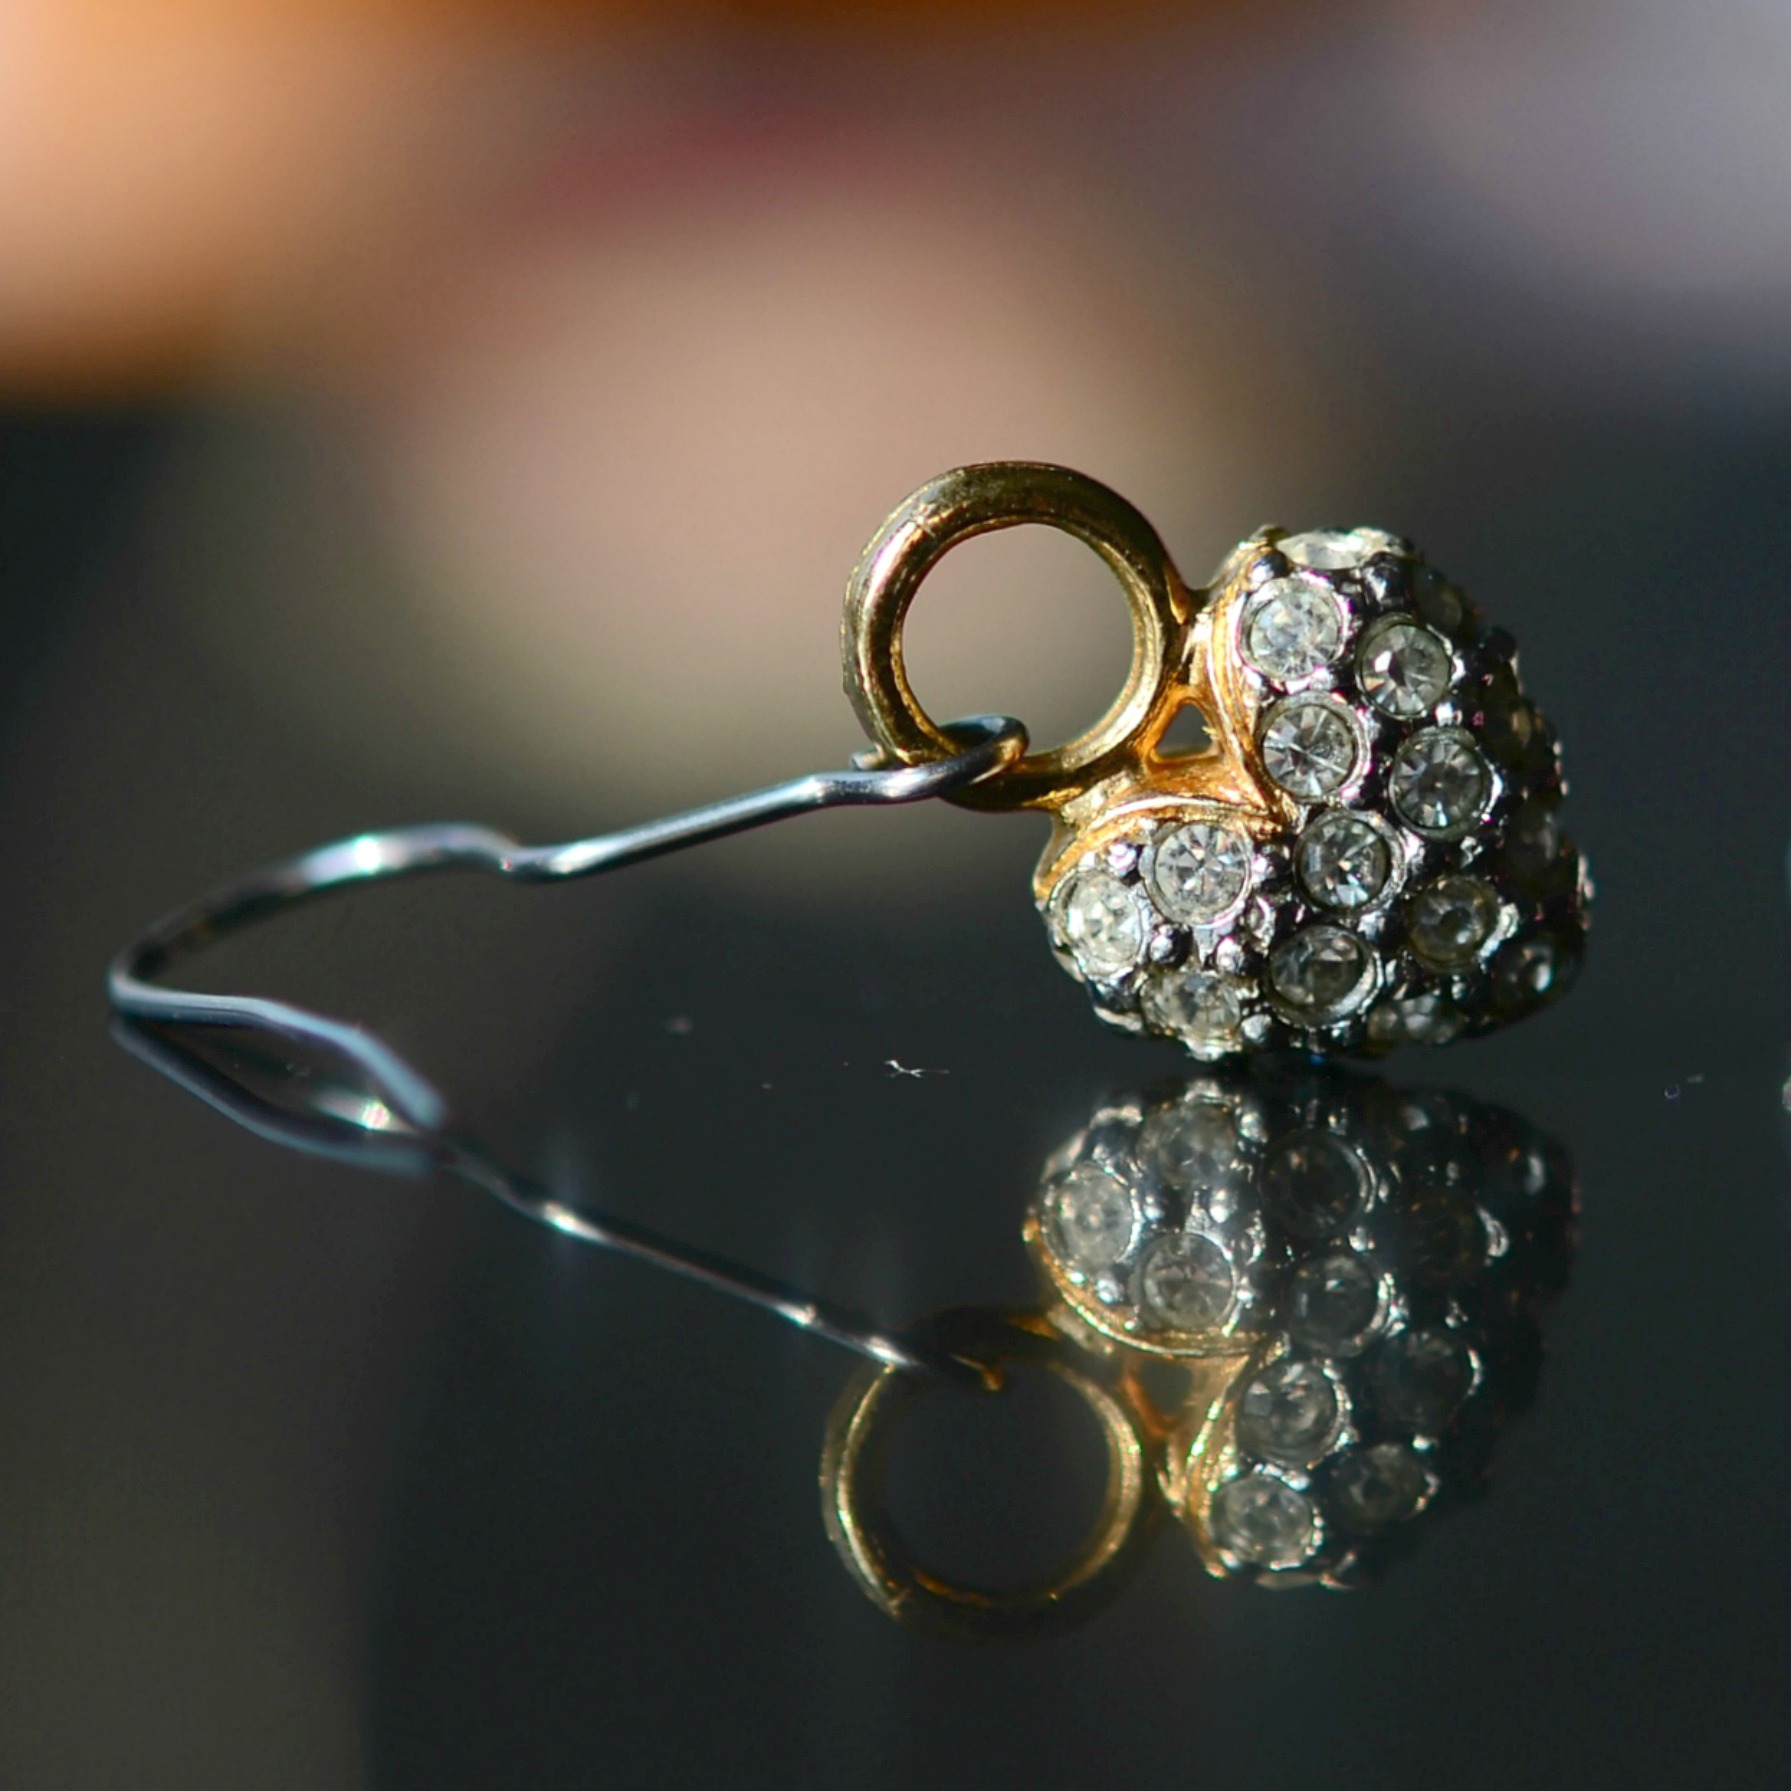 there is a gold ring and a diamond on a glass surface